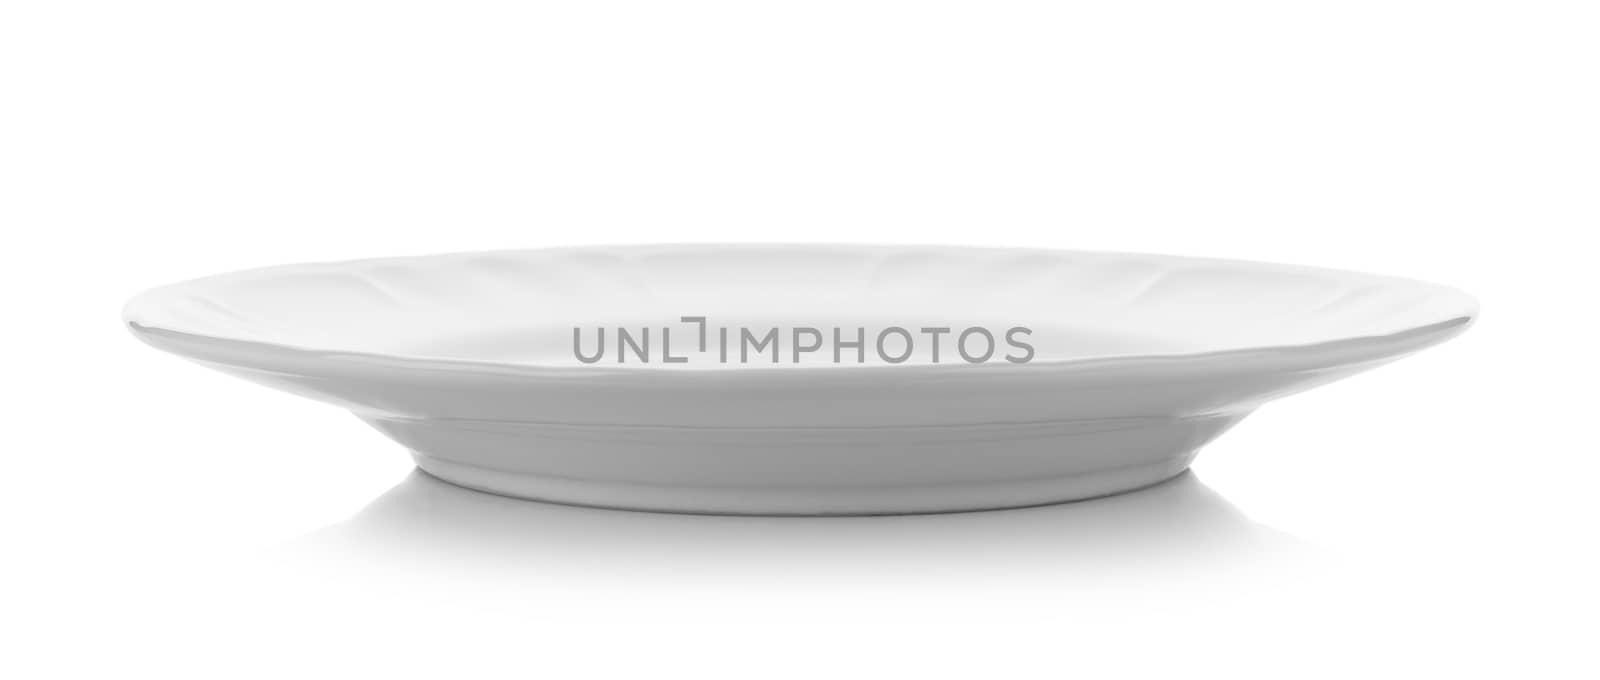 ceramic plate on white background by sommai